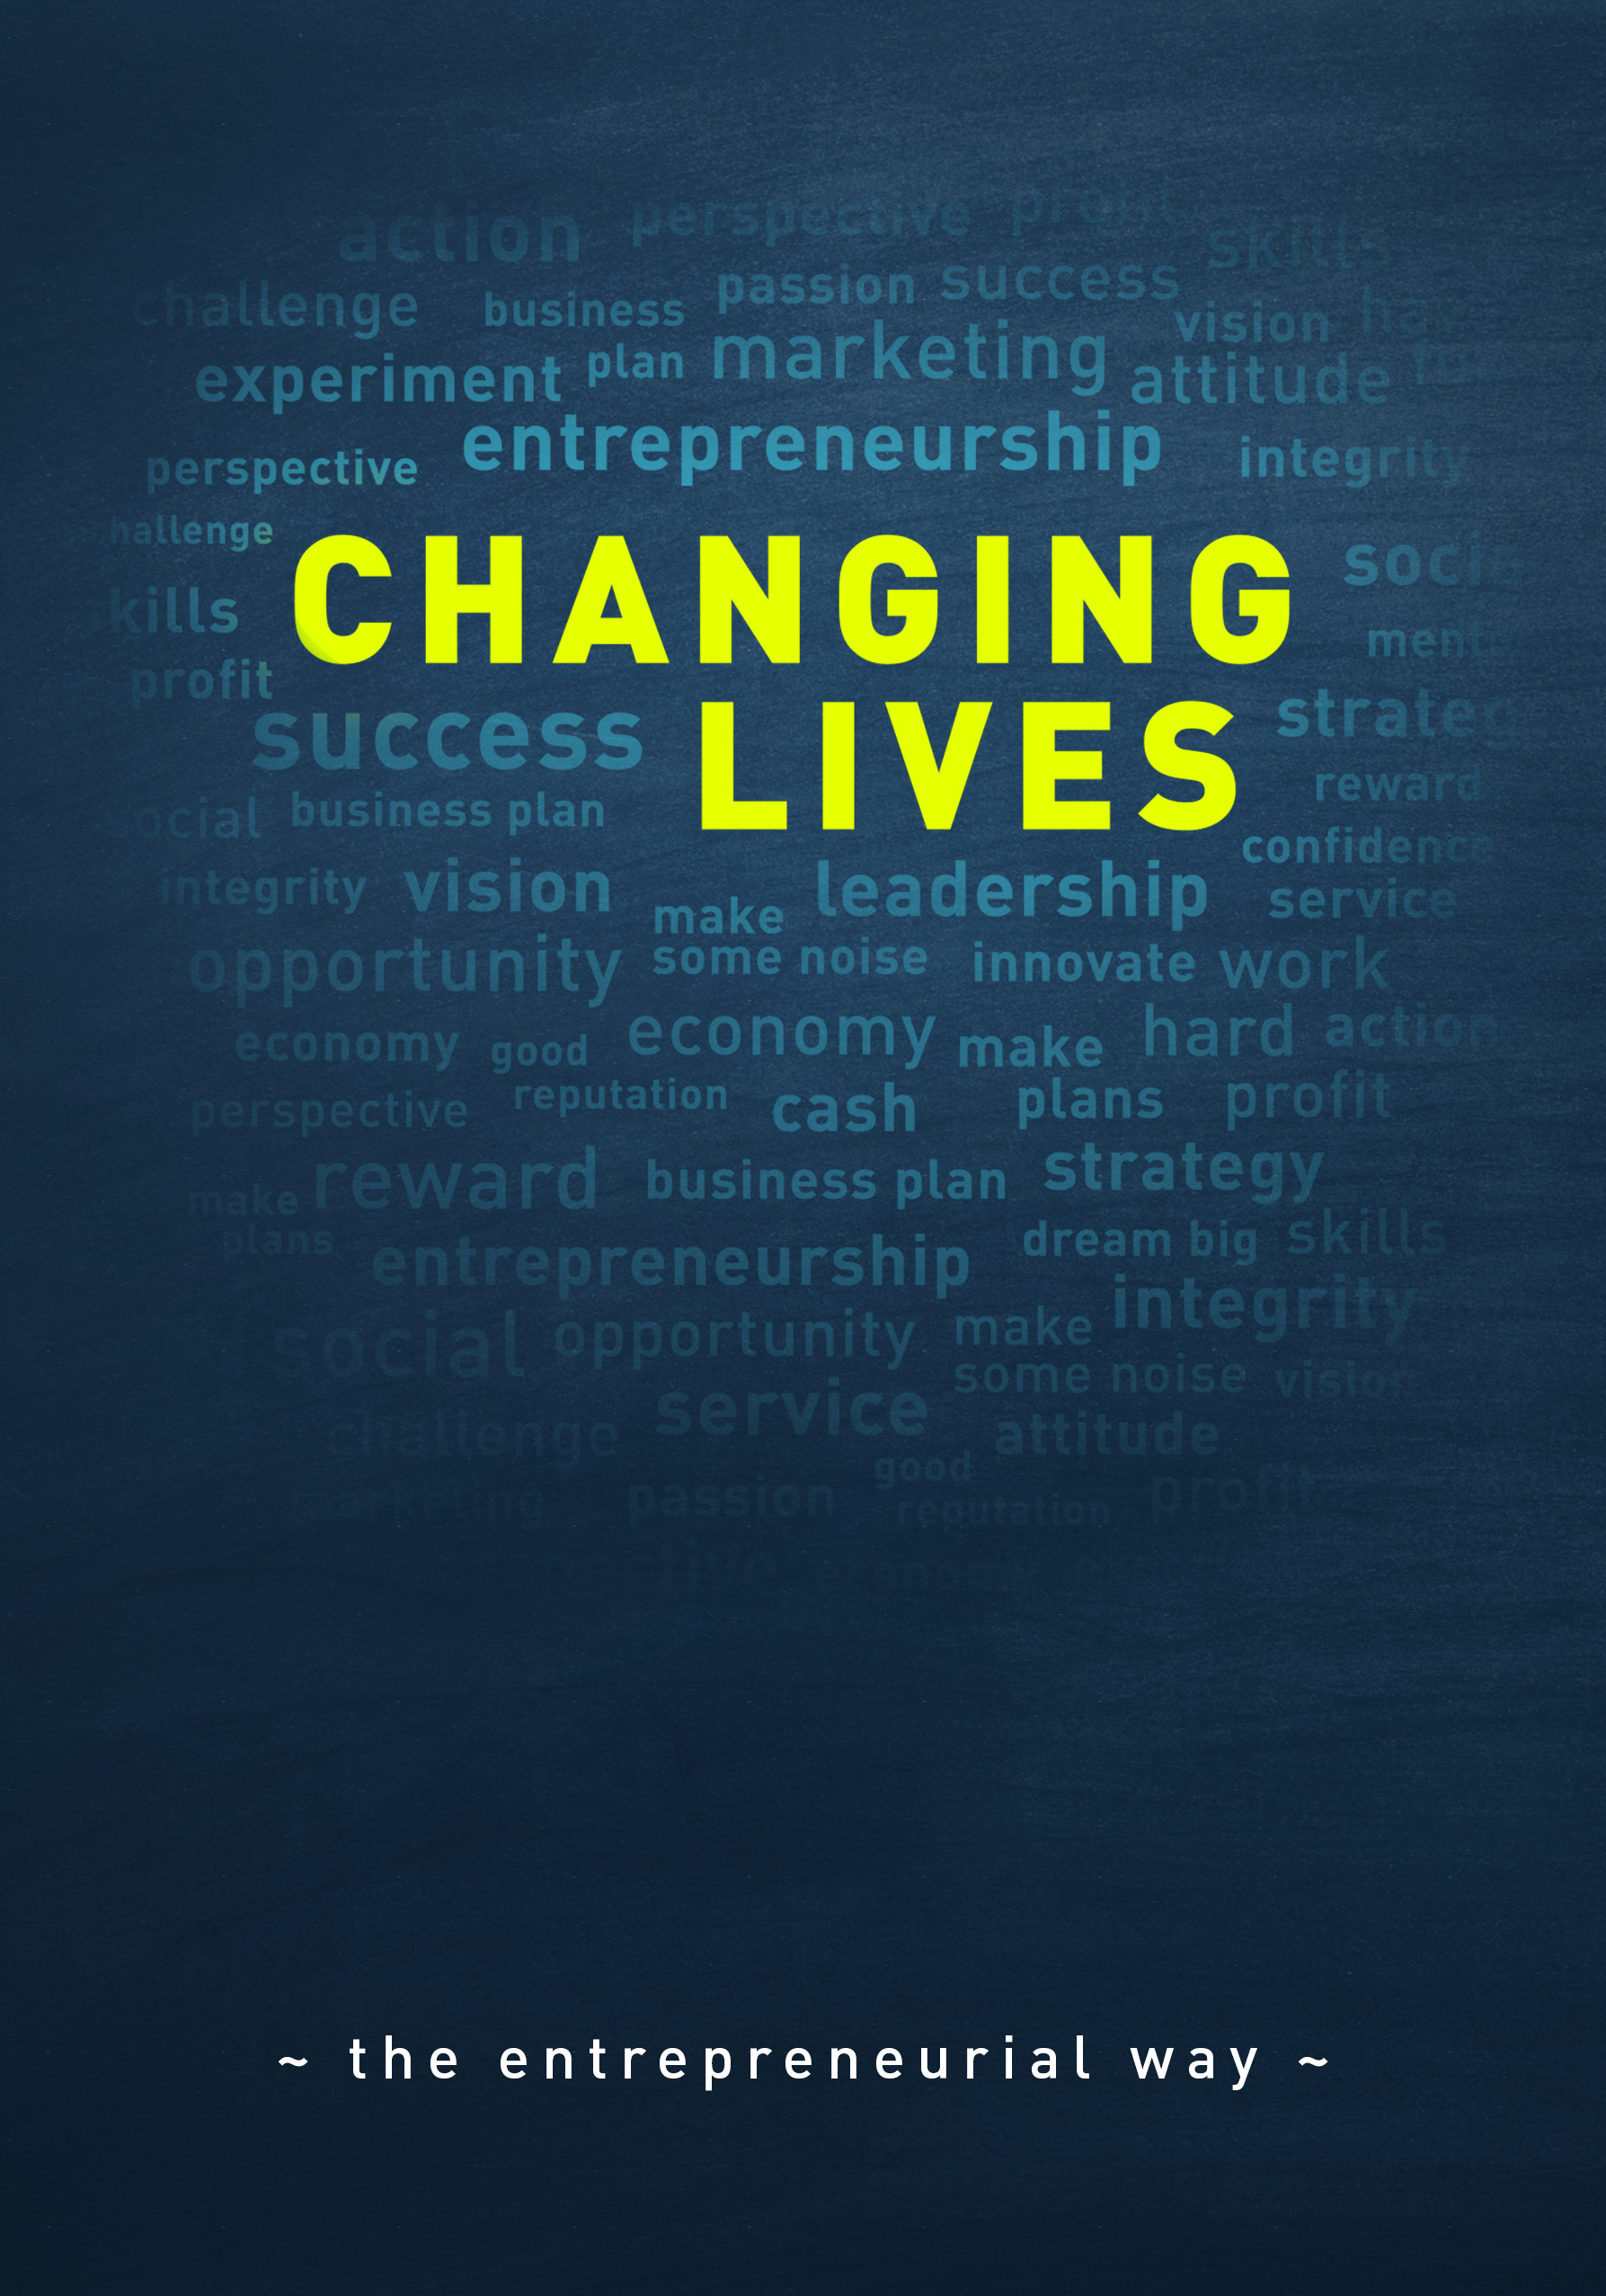 Changing Lives – The Entrepreneurial Way